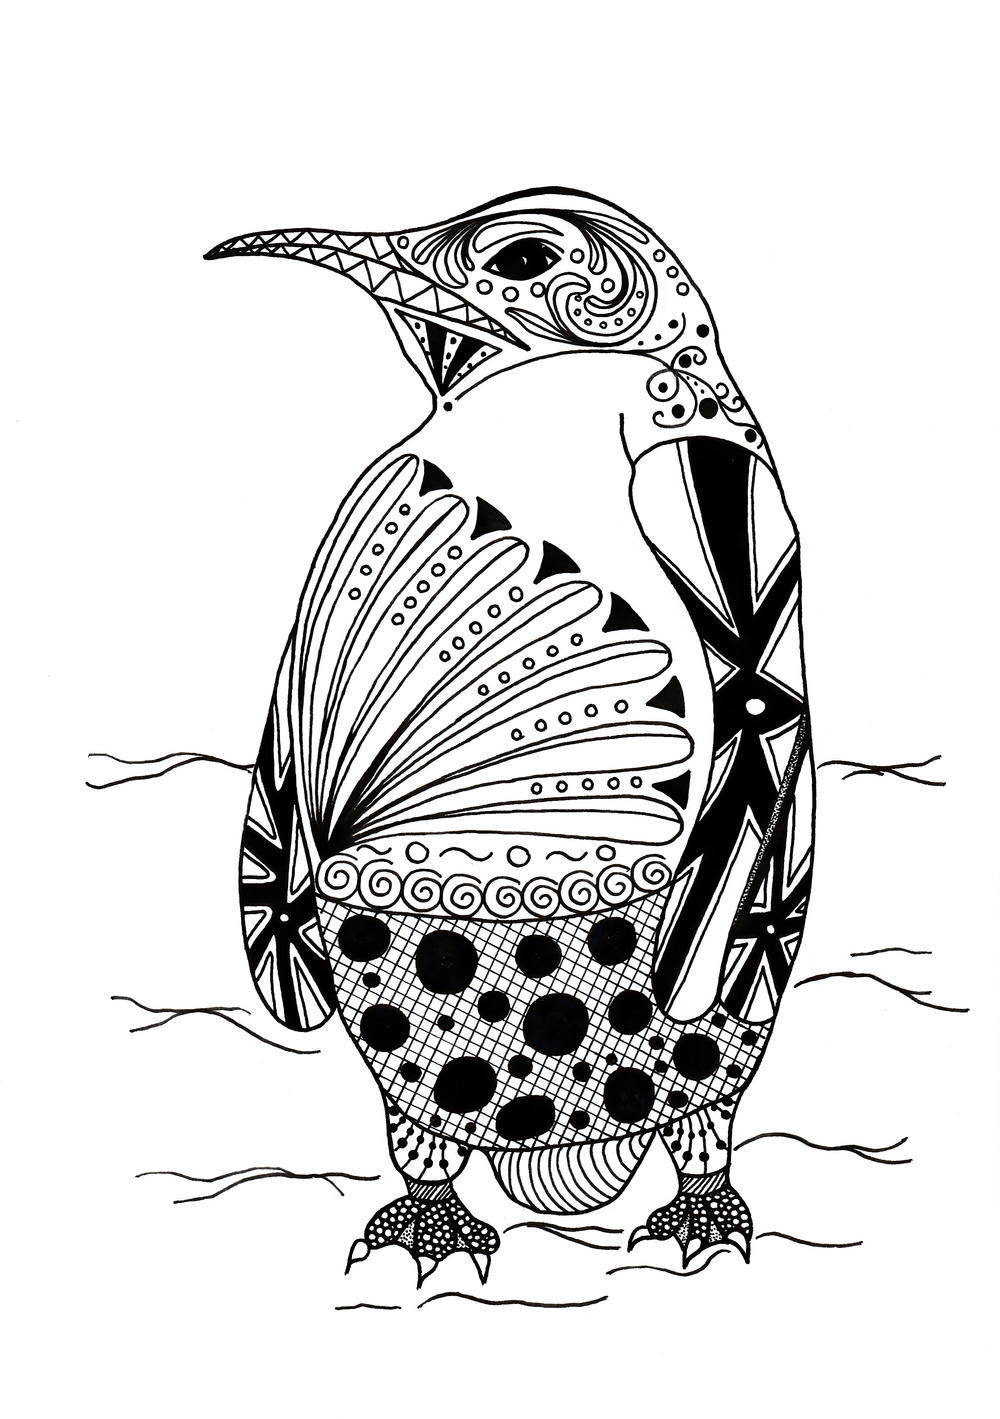 Coloring Pages Adult
 Intricate Penguin Adult Coloring Page